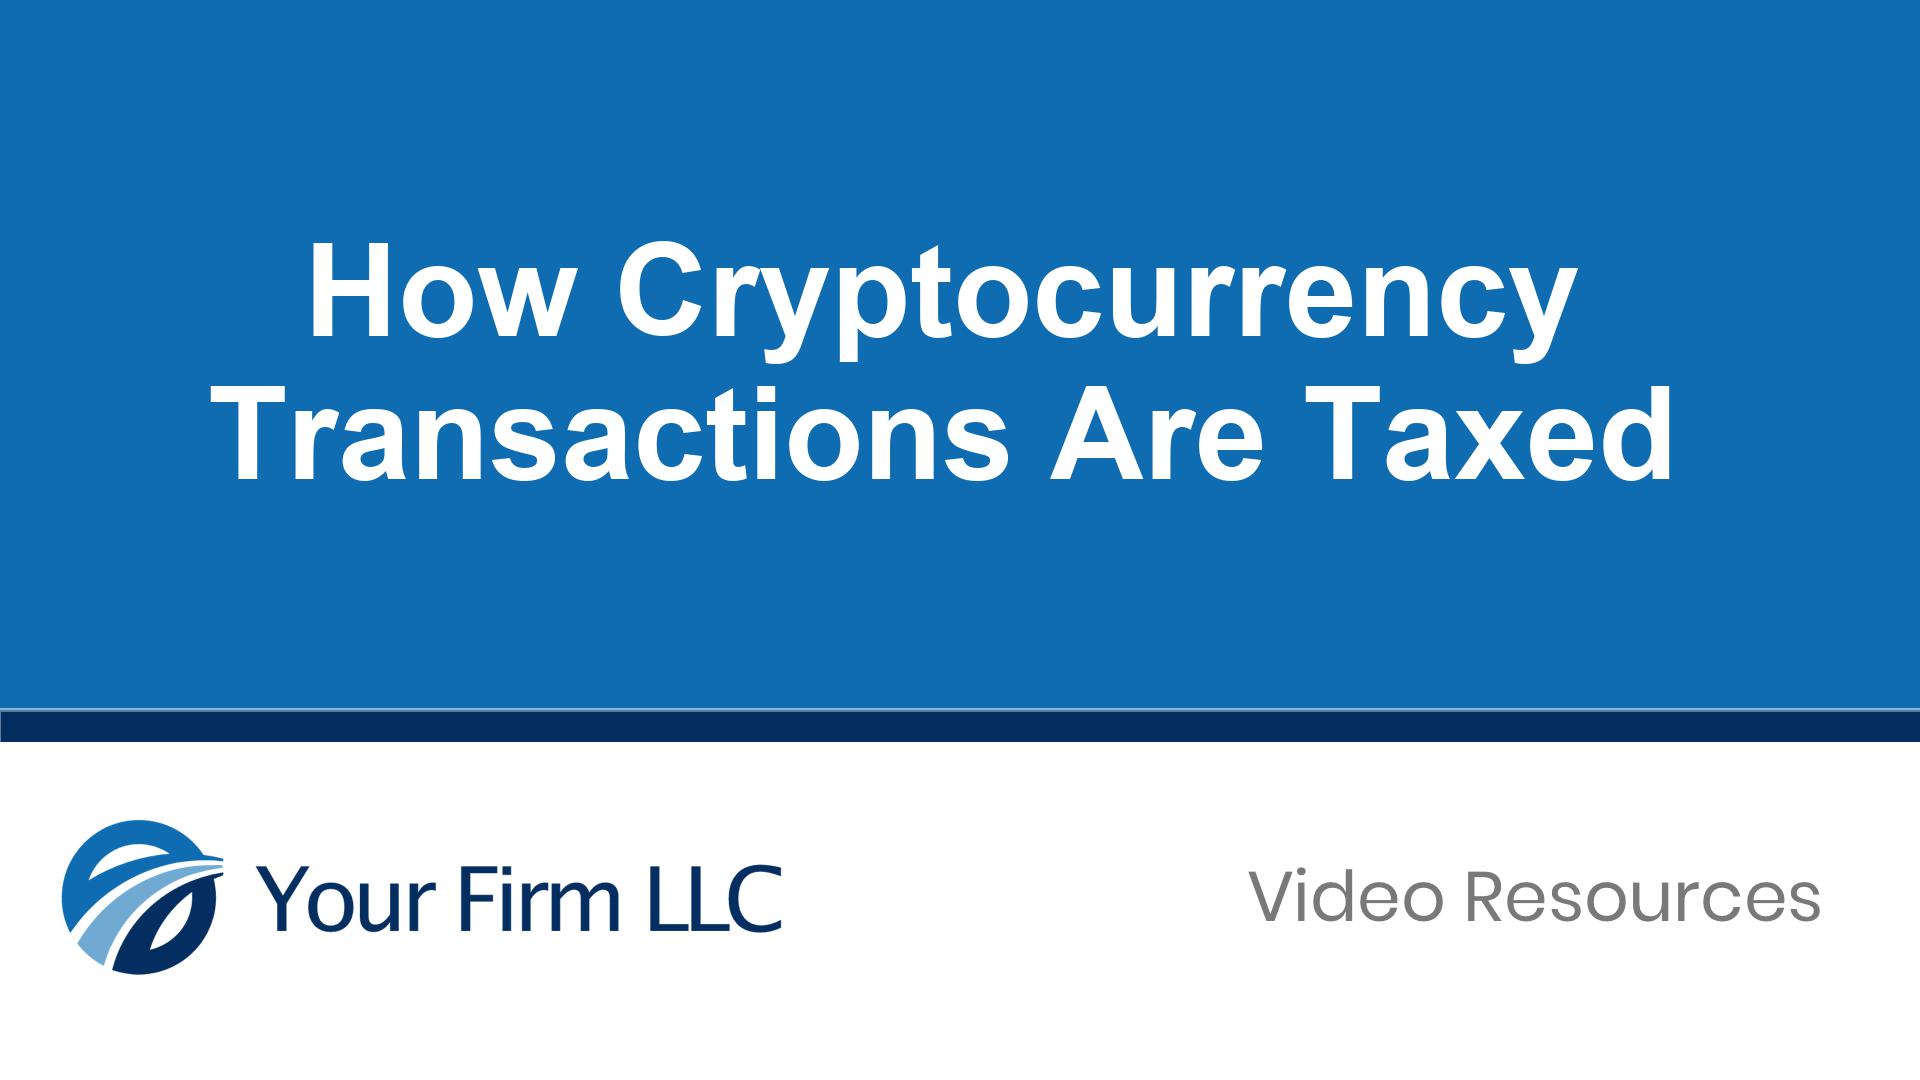 How Cryptocurrency Transactions Are Taxed